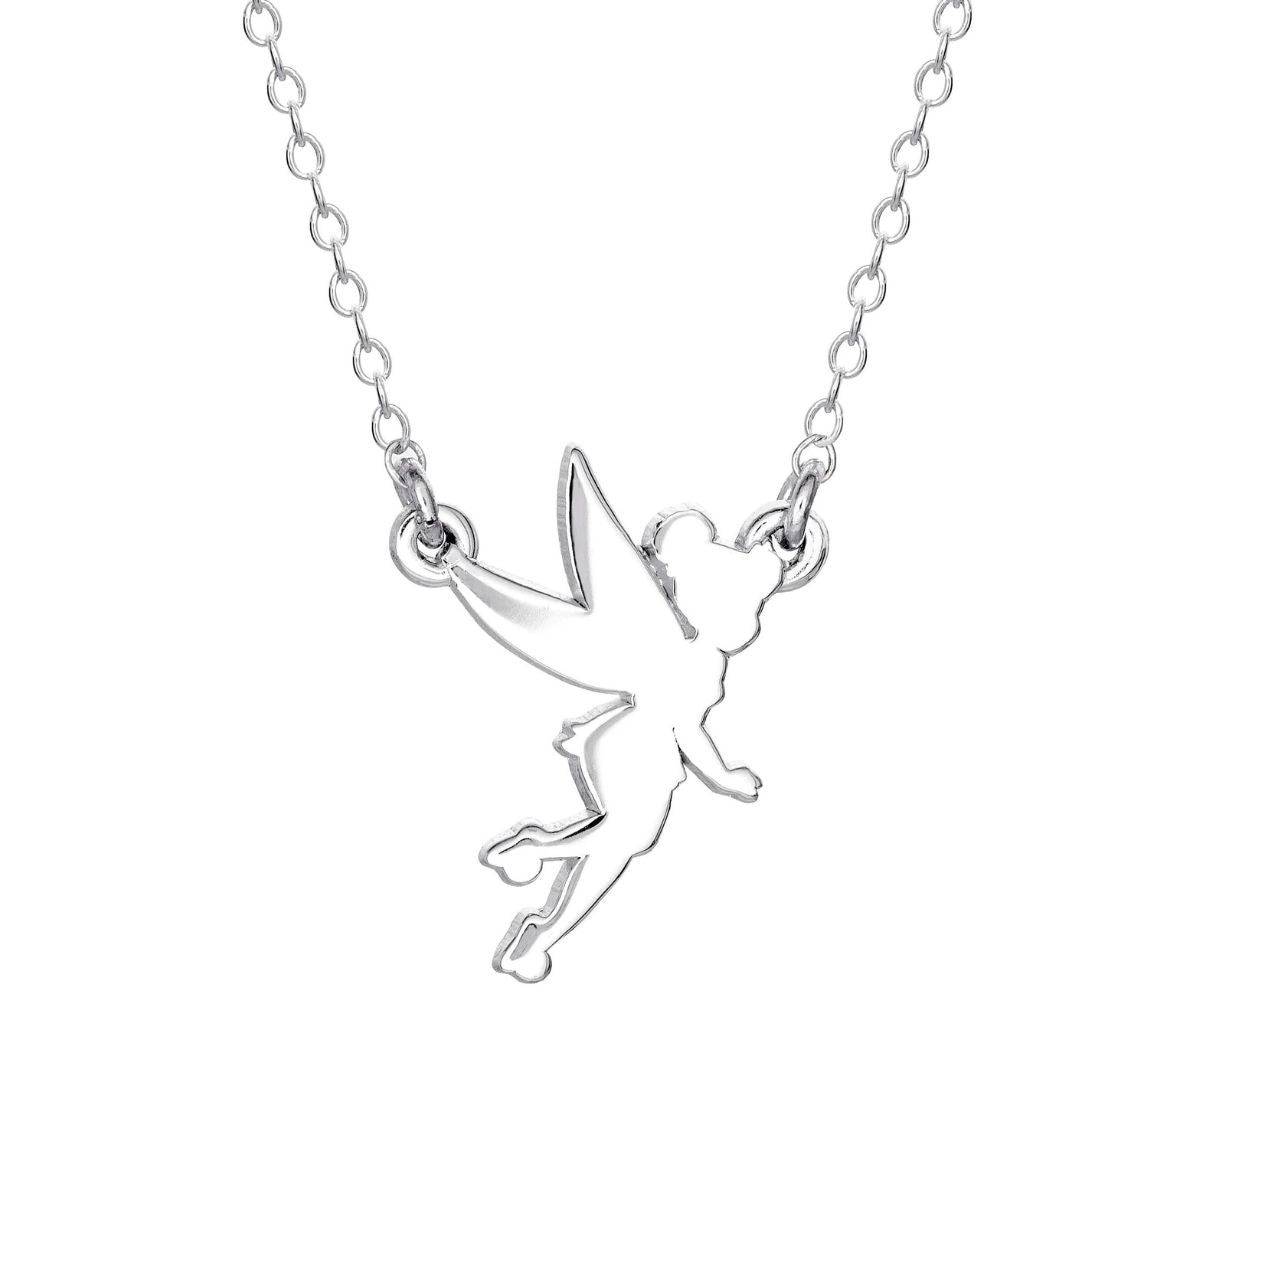 Disney Tinkerbell Silhouette Sterling Silver Necklace Princess Collection  Disney Princess Collection, add that magical look with these amazing and instantly recognizable famous silhouette of Tinkerbell.  Trendy and fashionable design, the Disney Princess collection, sterling silver necklace add a chic, fun touch to any outfit.